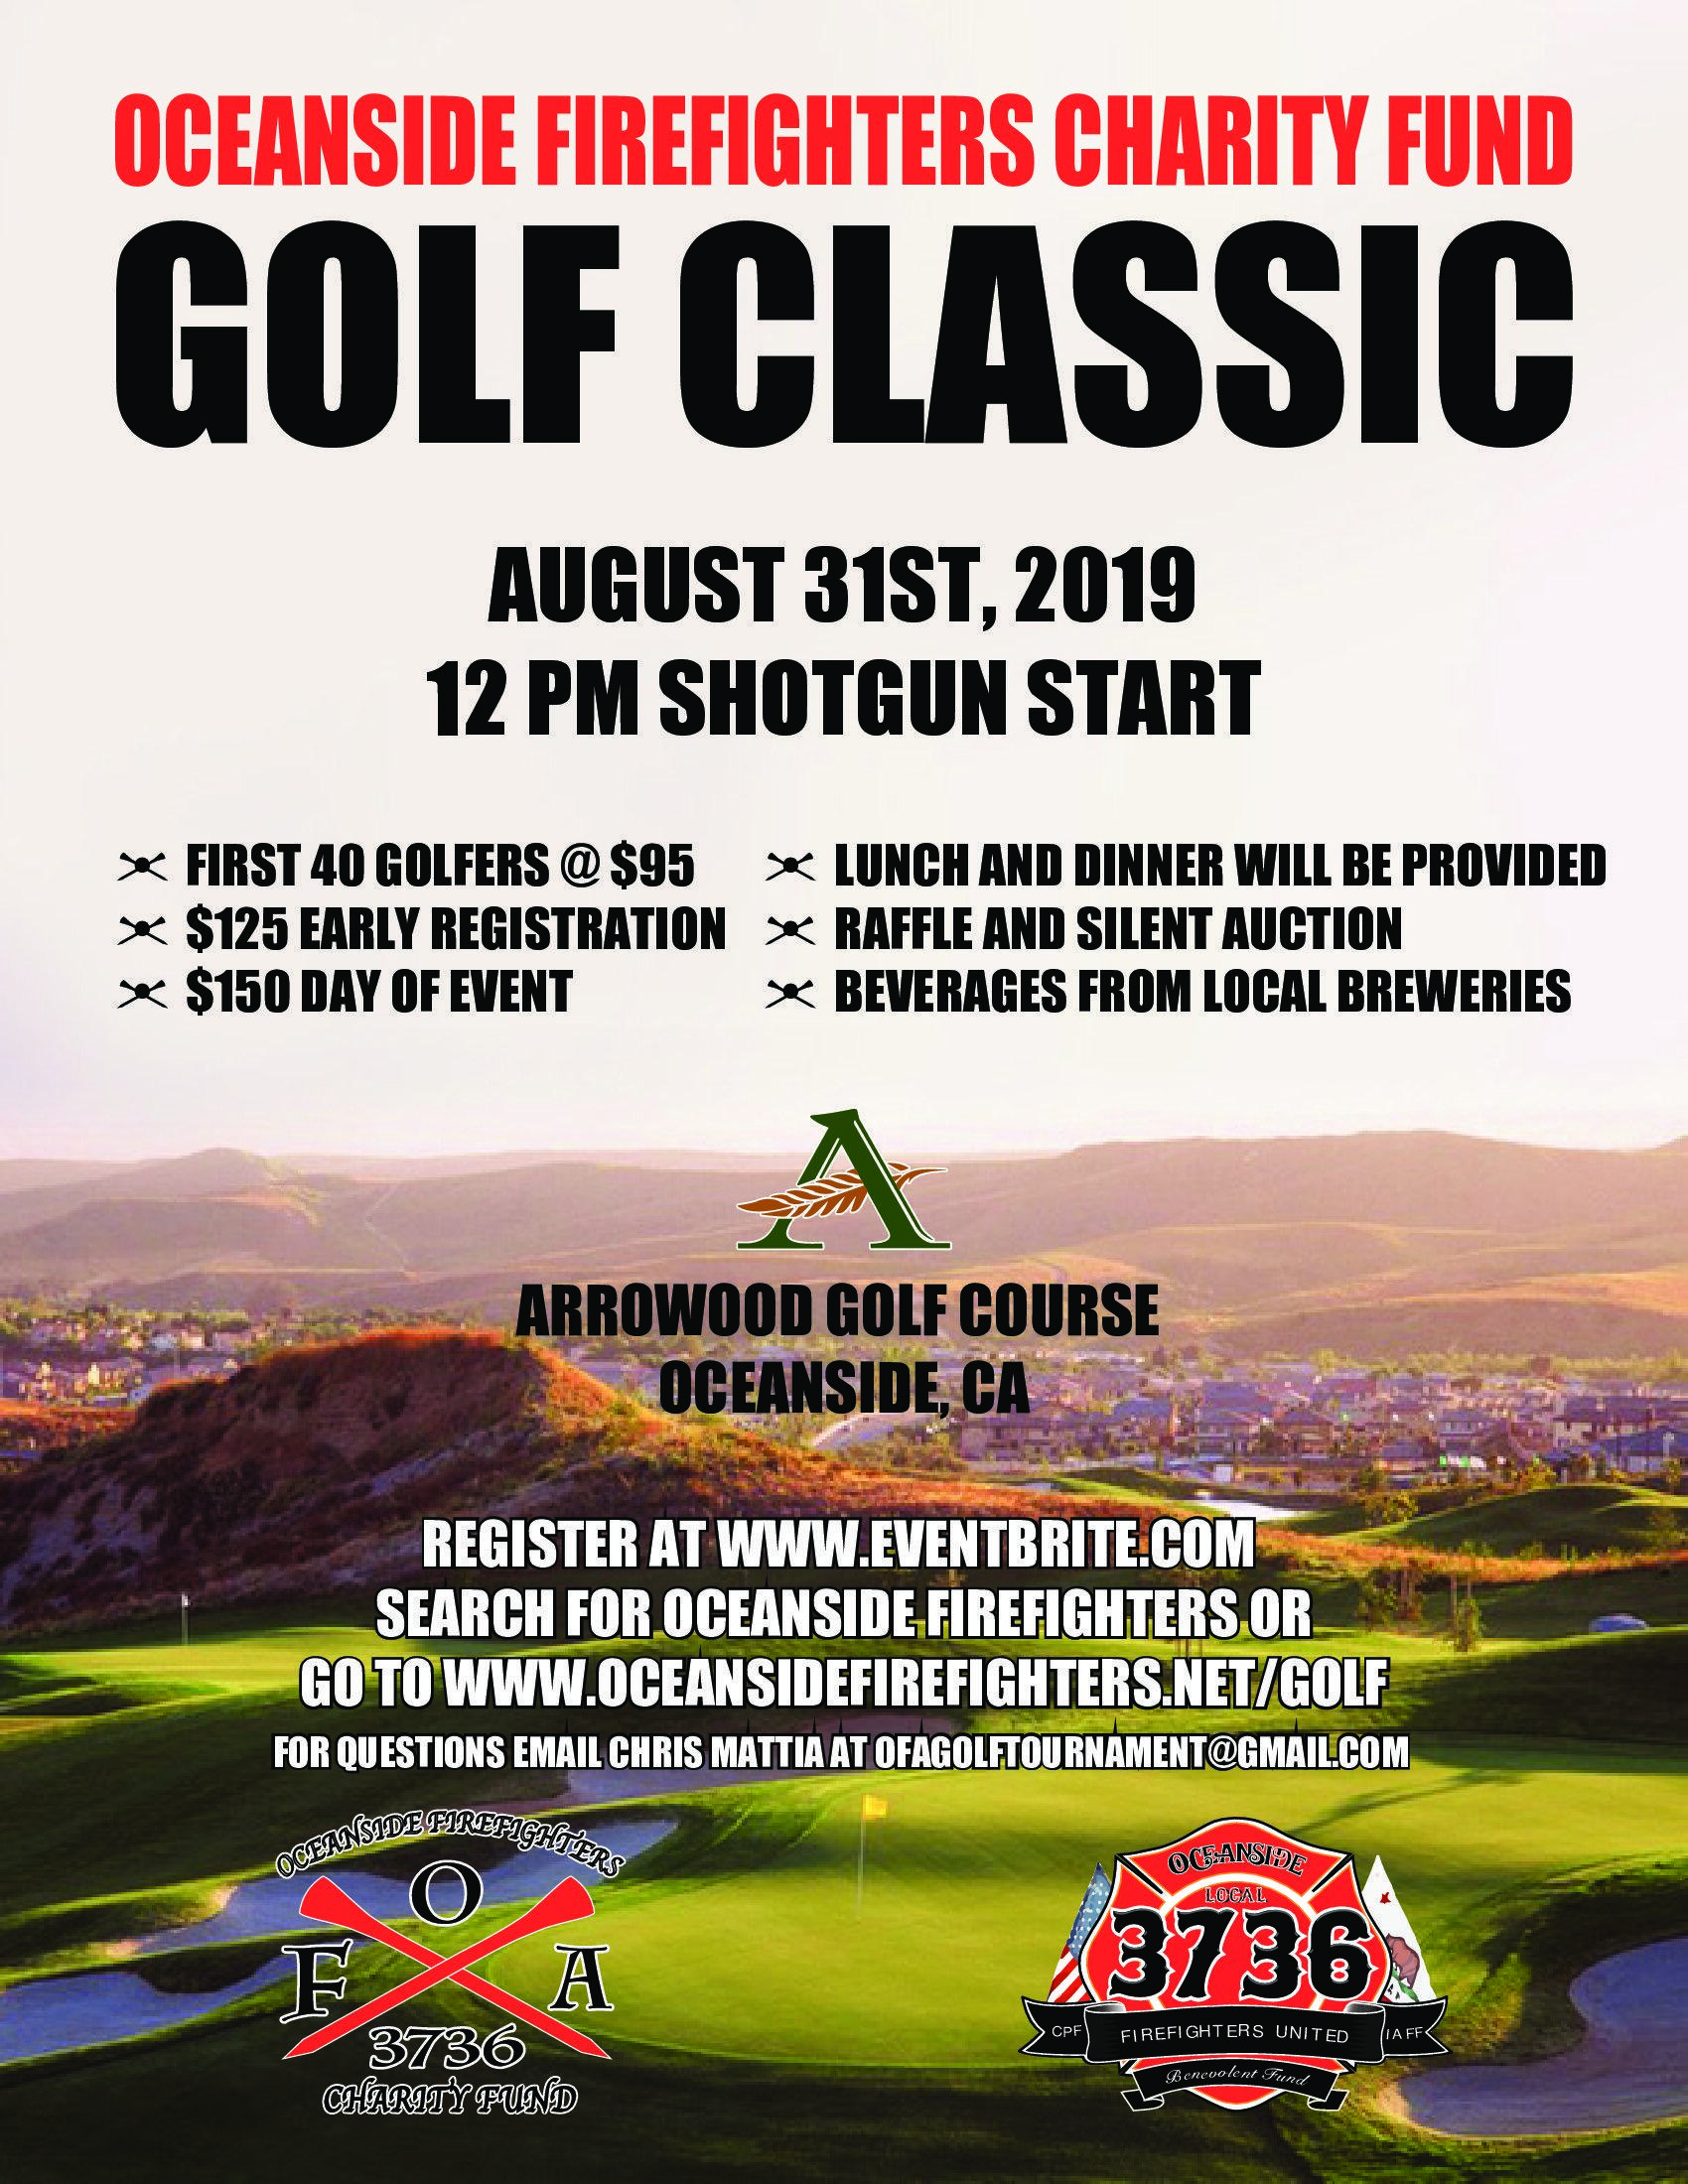 Oceanside Firefighters Charity Fund Golf Classic